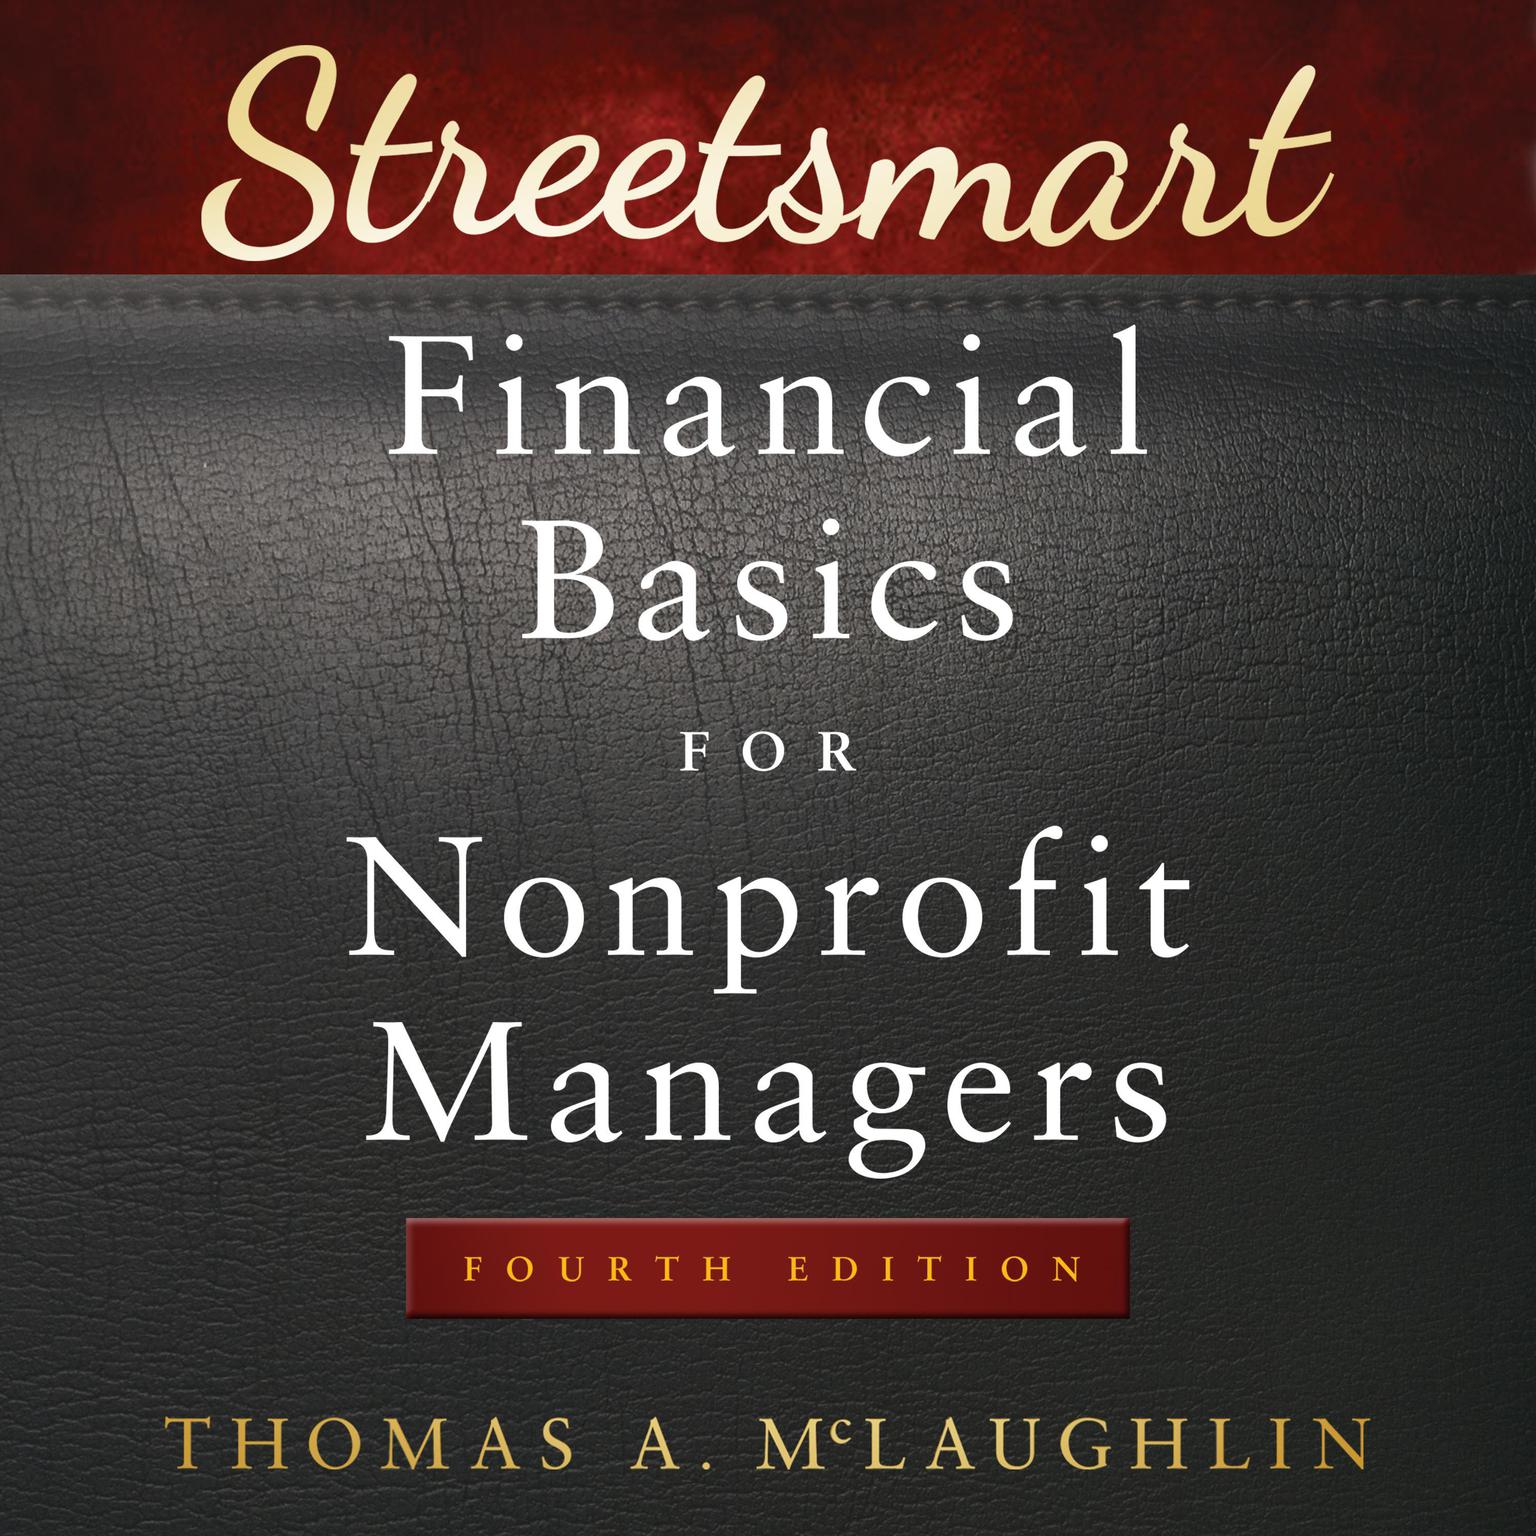 Streetsmart Financial Basics for Nonprofit Managers: 4th Edition Audiobook, by Thomas A. McLaughlin